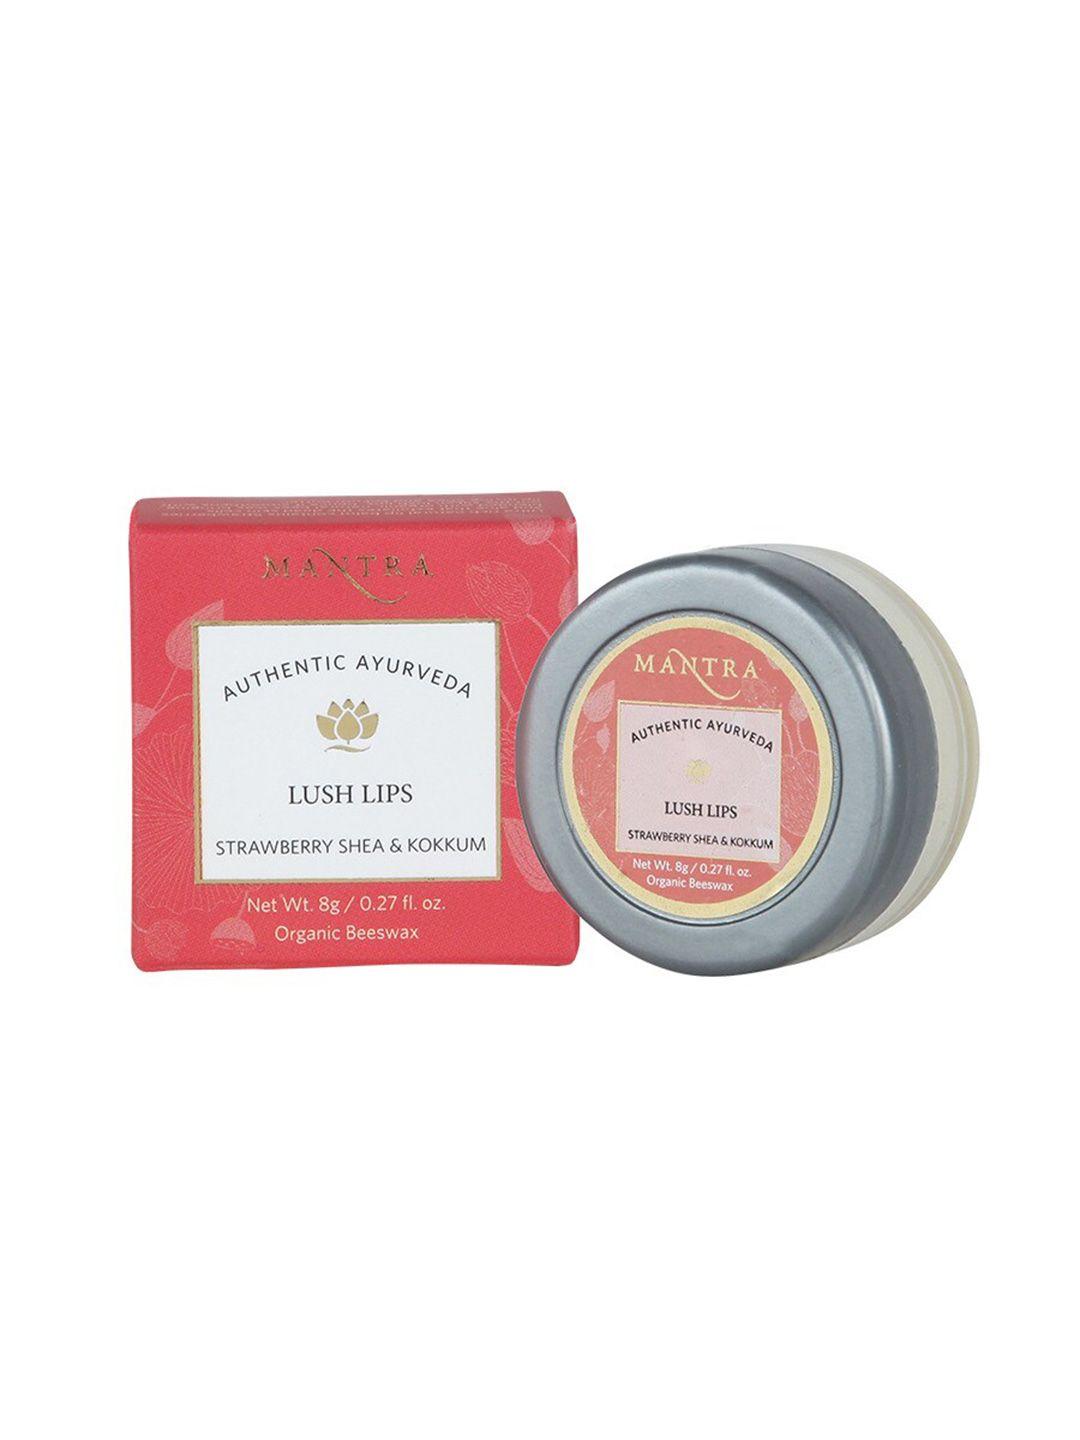 mantra herbal lush lips balm with strawberry, shea & kokkum for glossy lips - 8gm